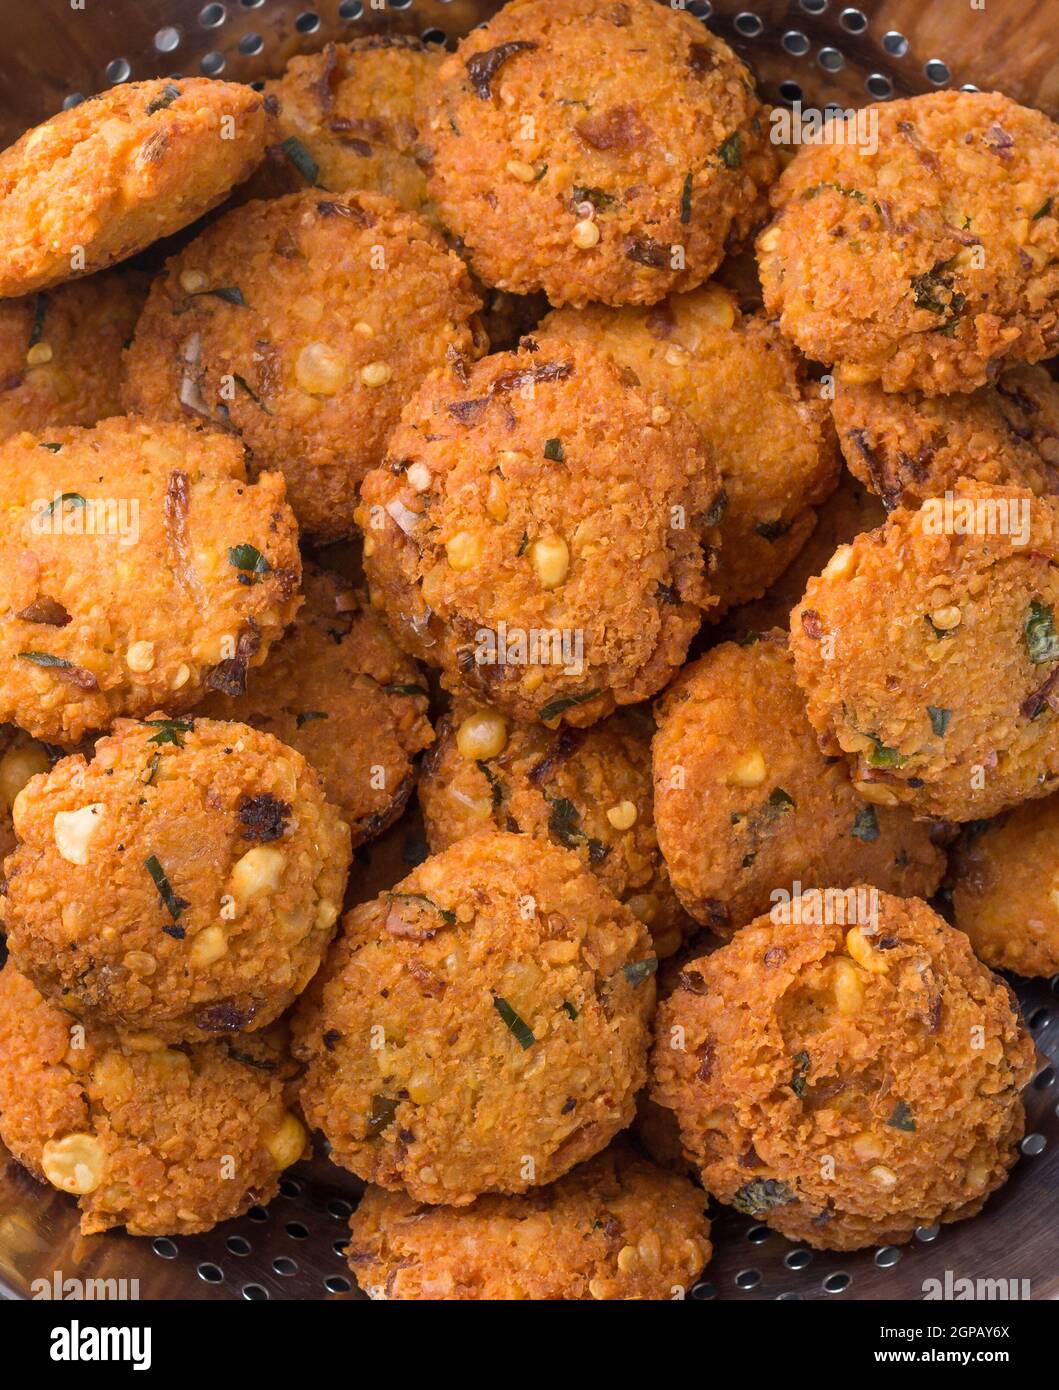 lentil fritters, savoury fried snack also called dal vada, wada or vadai in south east asia, deep fried vegetarian food Stock Photo